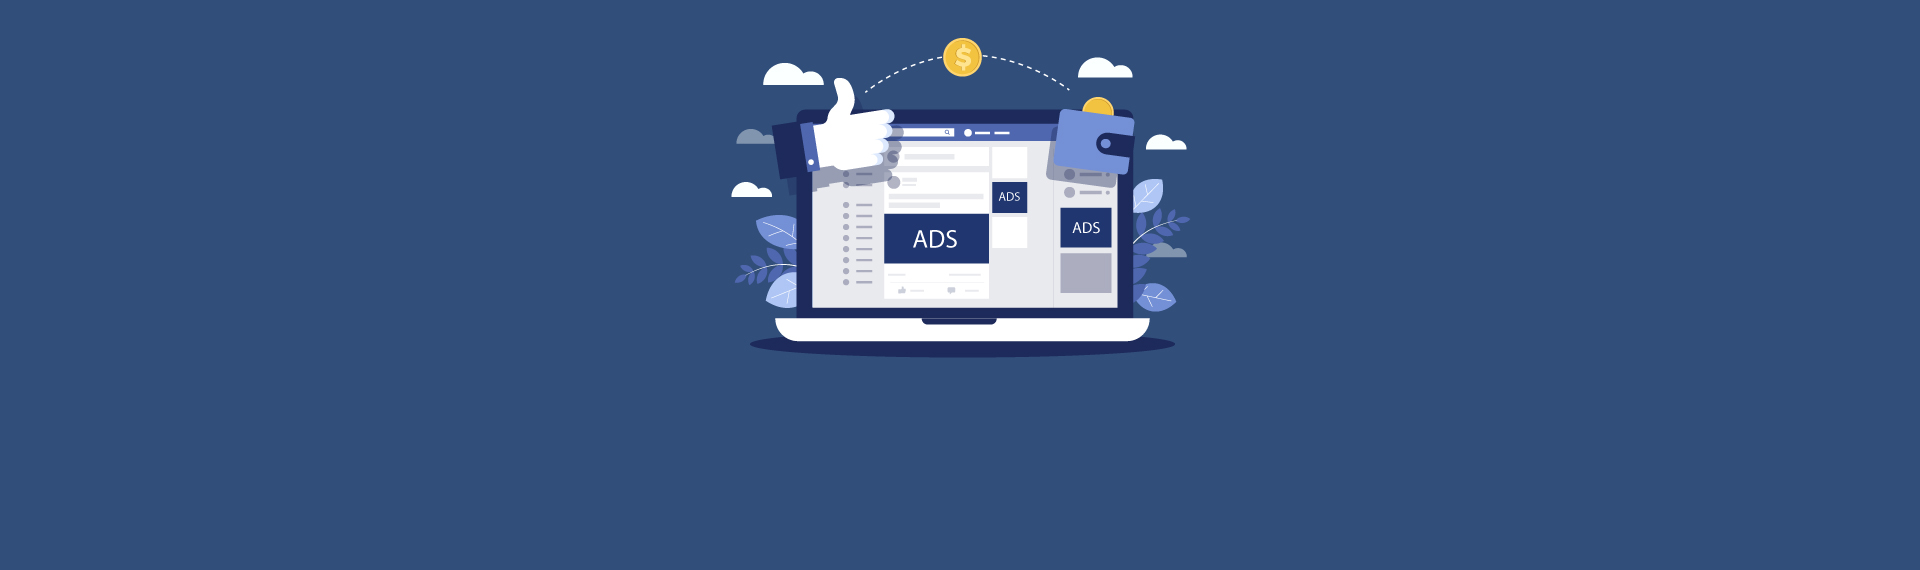 Are You Properly Measuring Your Facebook Ad Effectiveness?